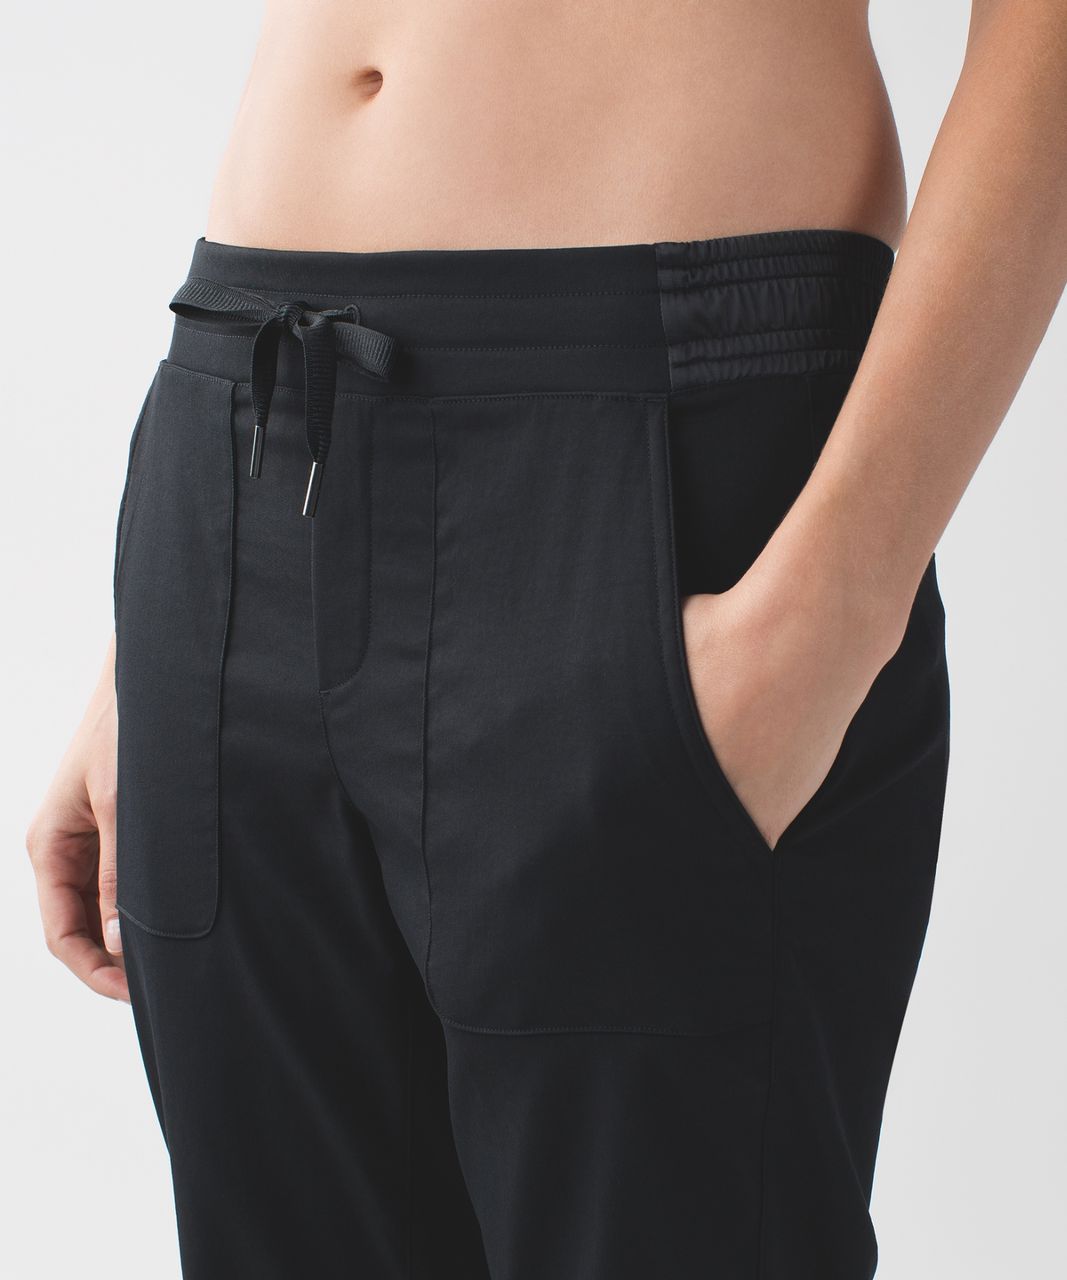 Lululemon &go Take You There Trouser - Black